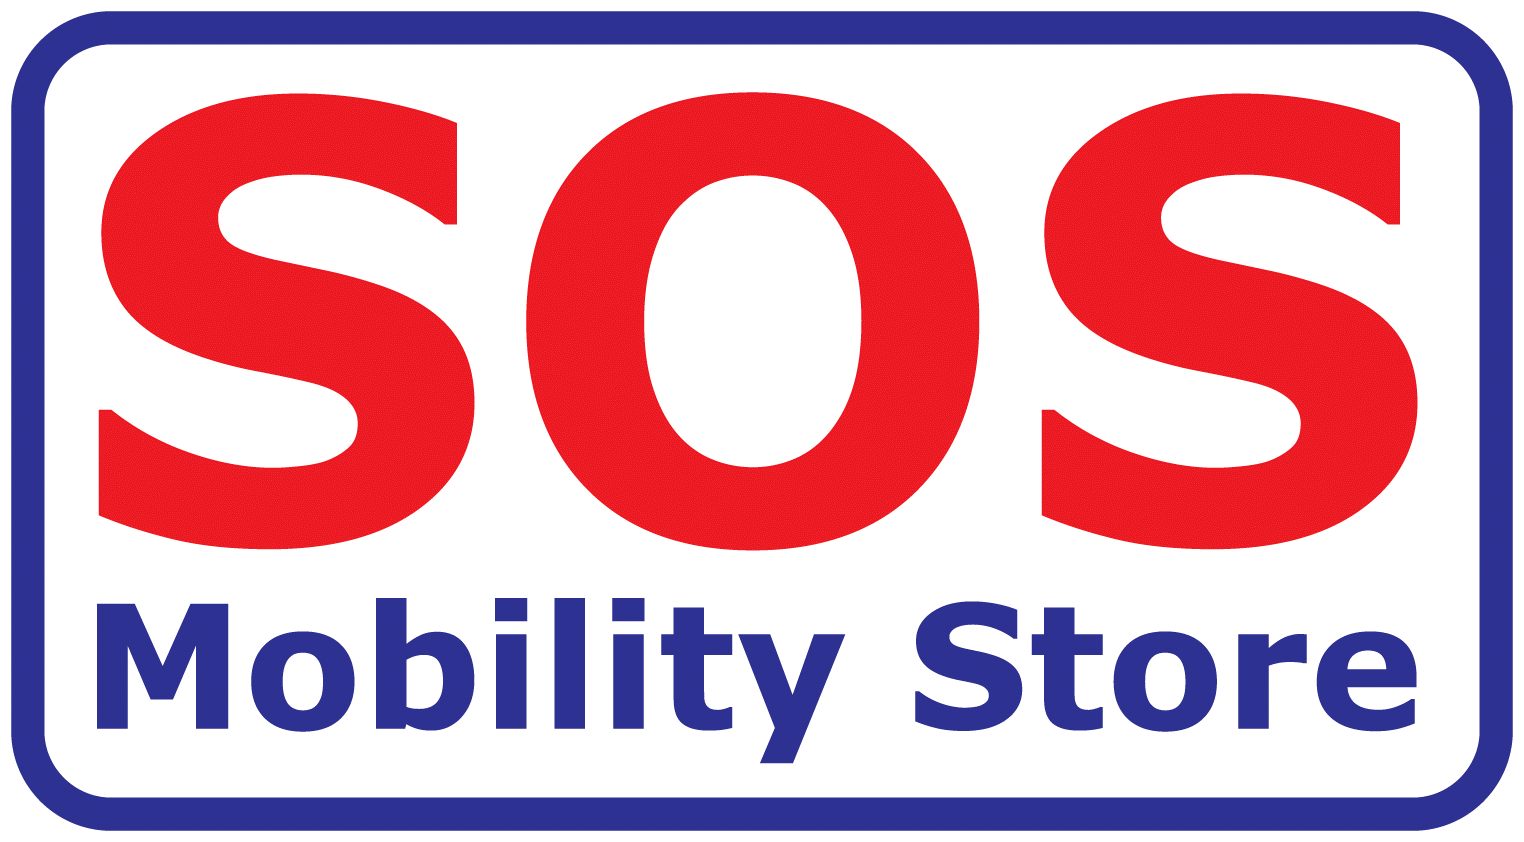 SOS MOBILITY SAN DIEGO STAIRLIFTS